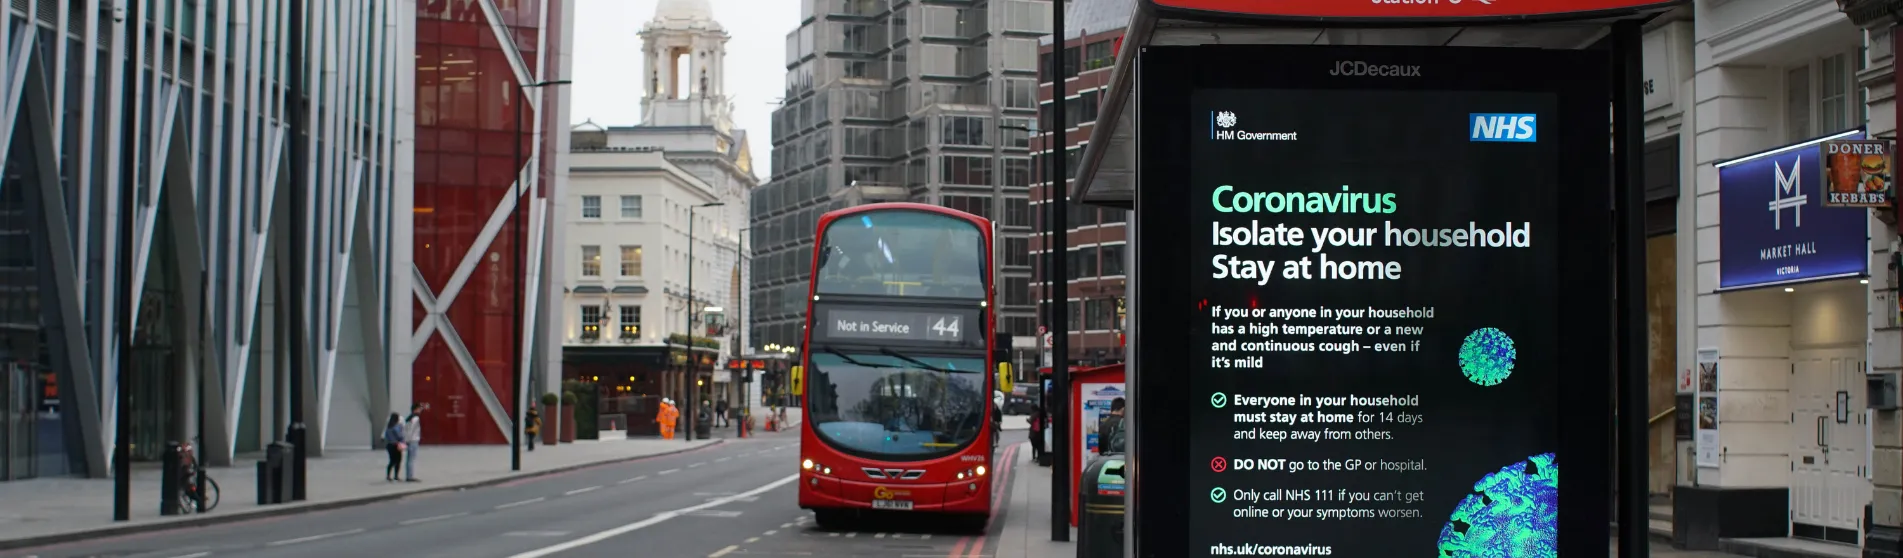 A London bus stop during the COVID-19 pandemic. A London bus approaches a bus stop with a notice saying 'Not in Service'. The bus stop displays a public information poster about coronavirus